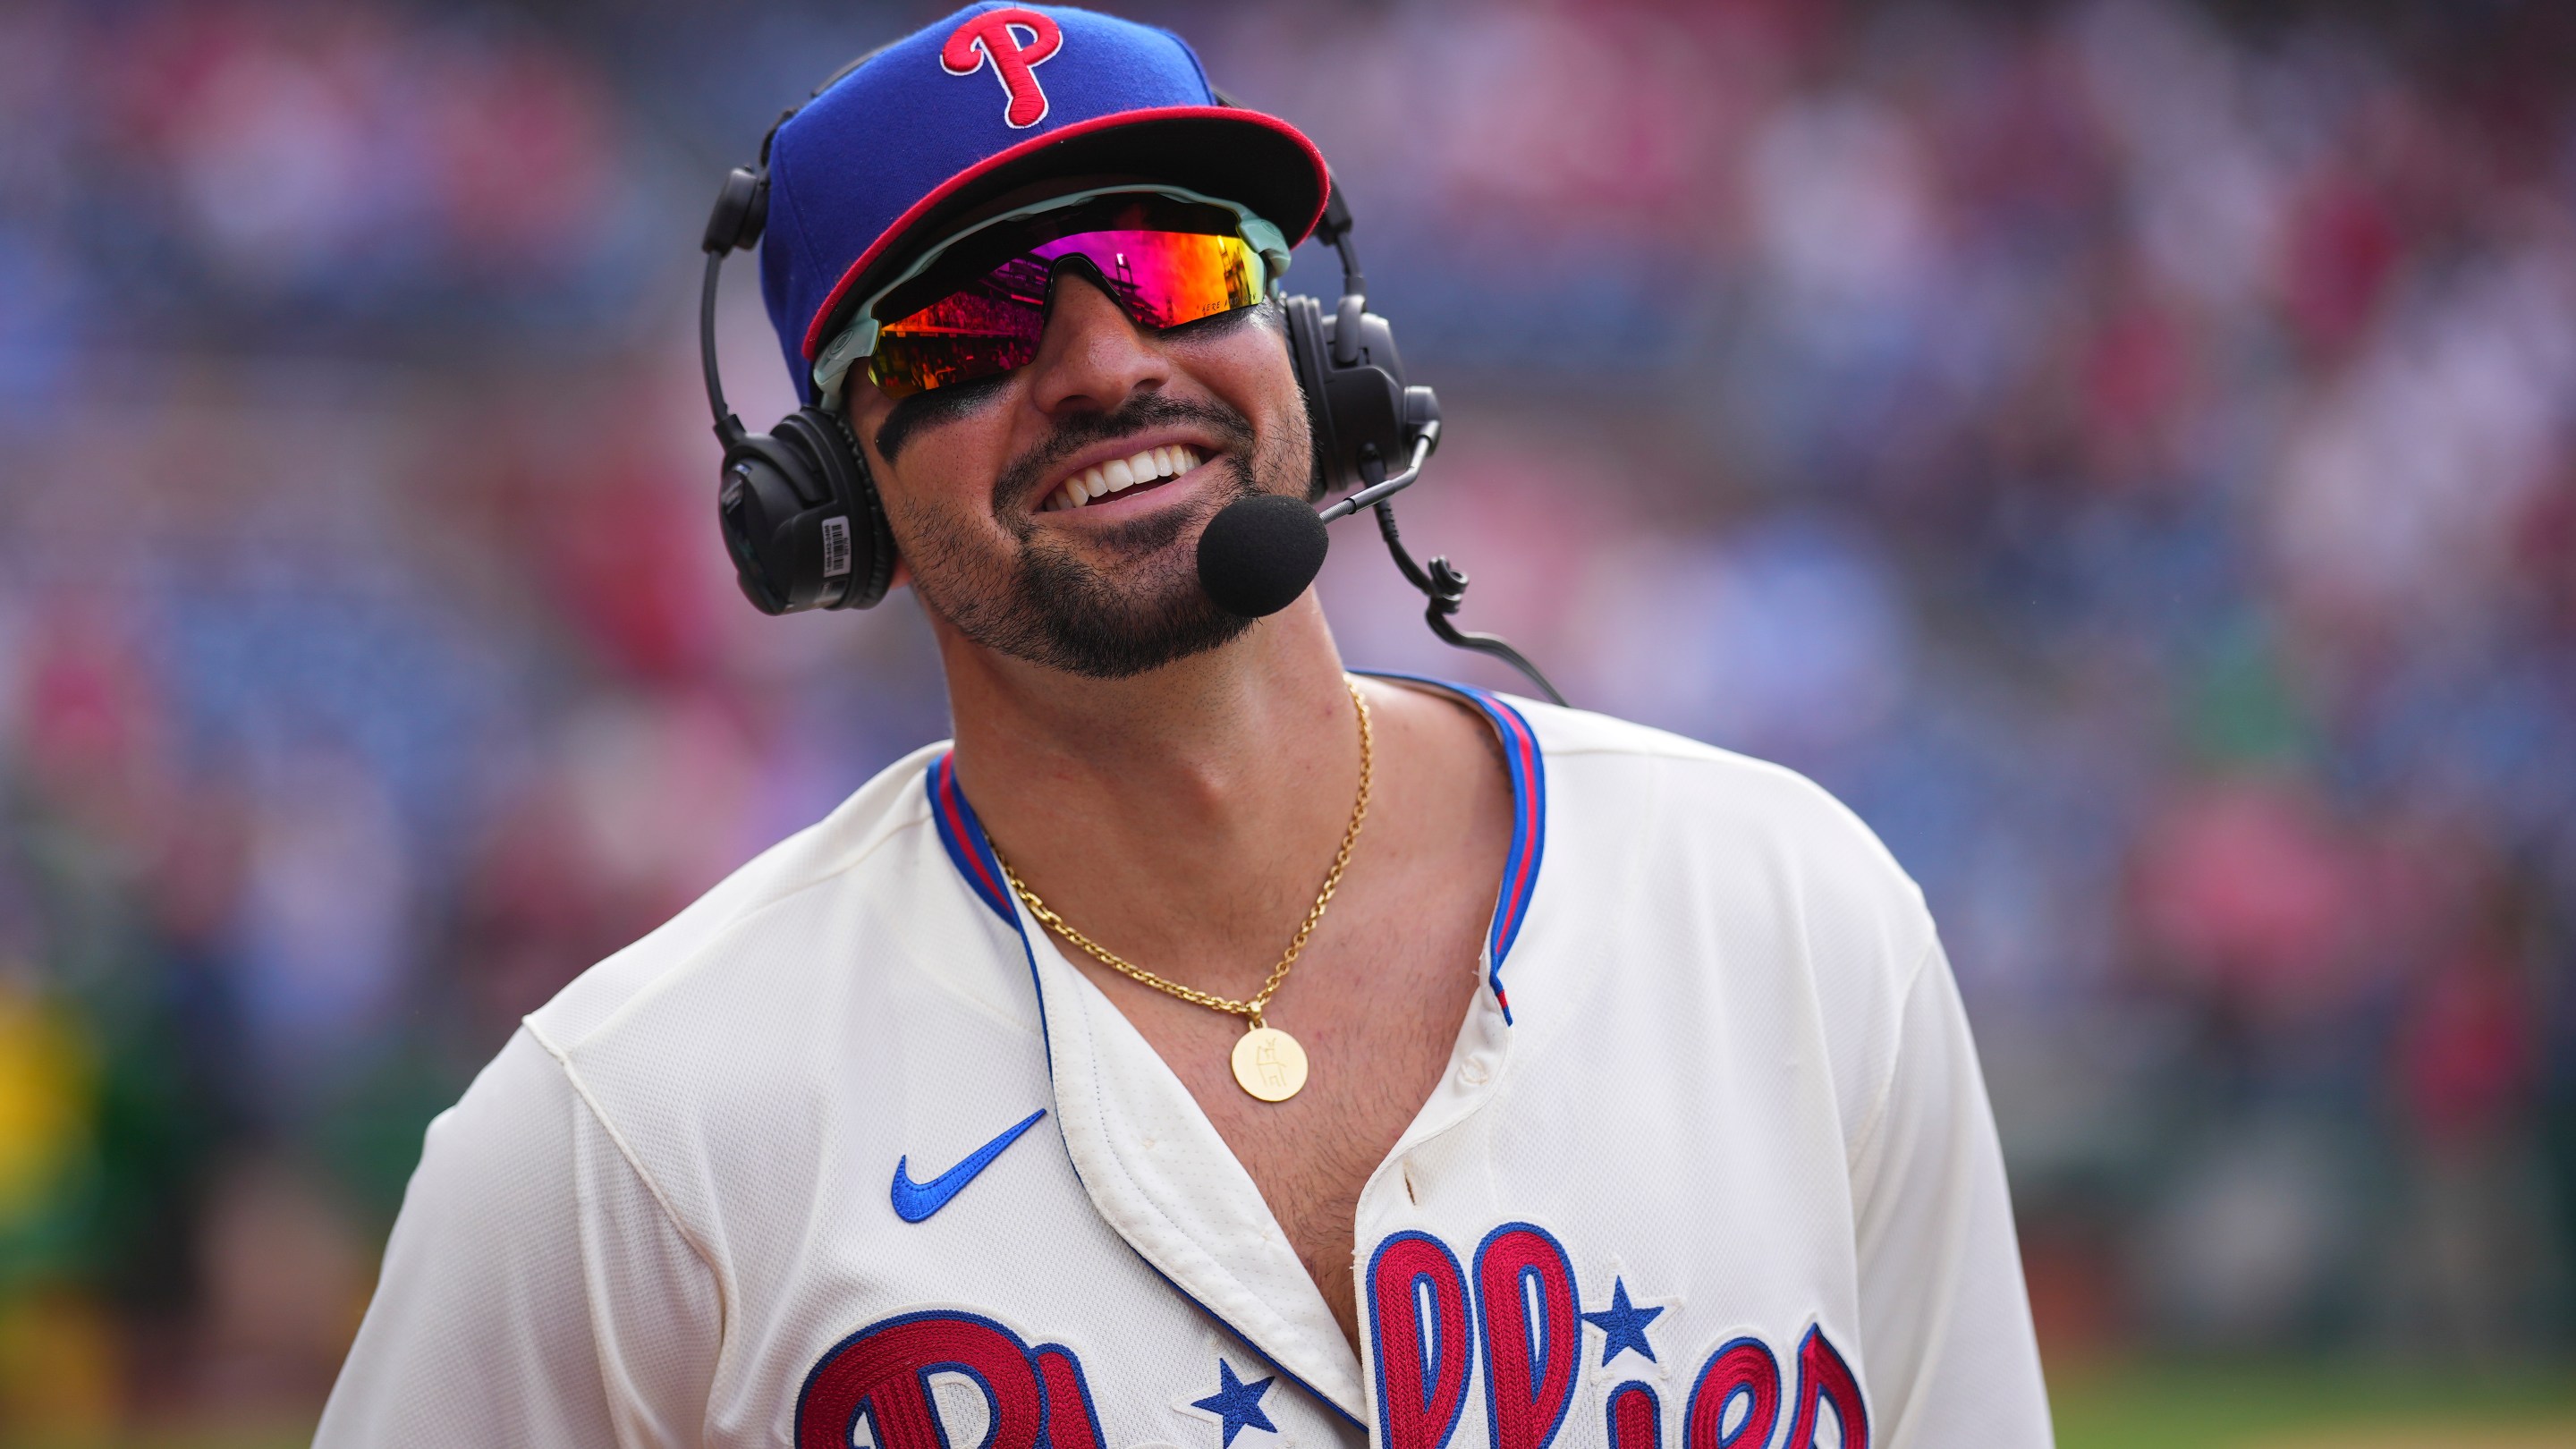 Nick Castellanos #8 of the Philadelphia Phillies smiles during his postgame interview, wearing both a headset and giant sunglasses